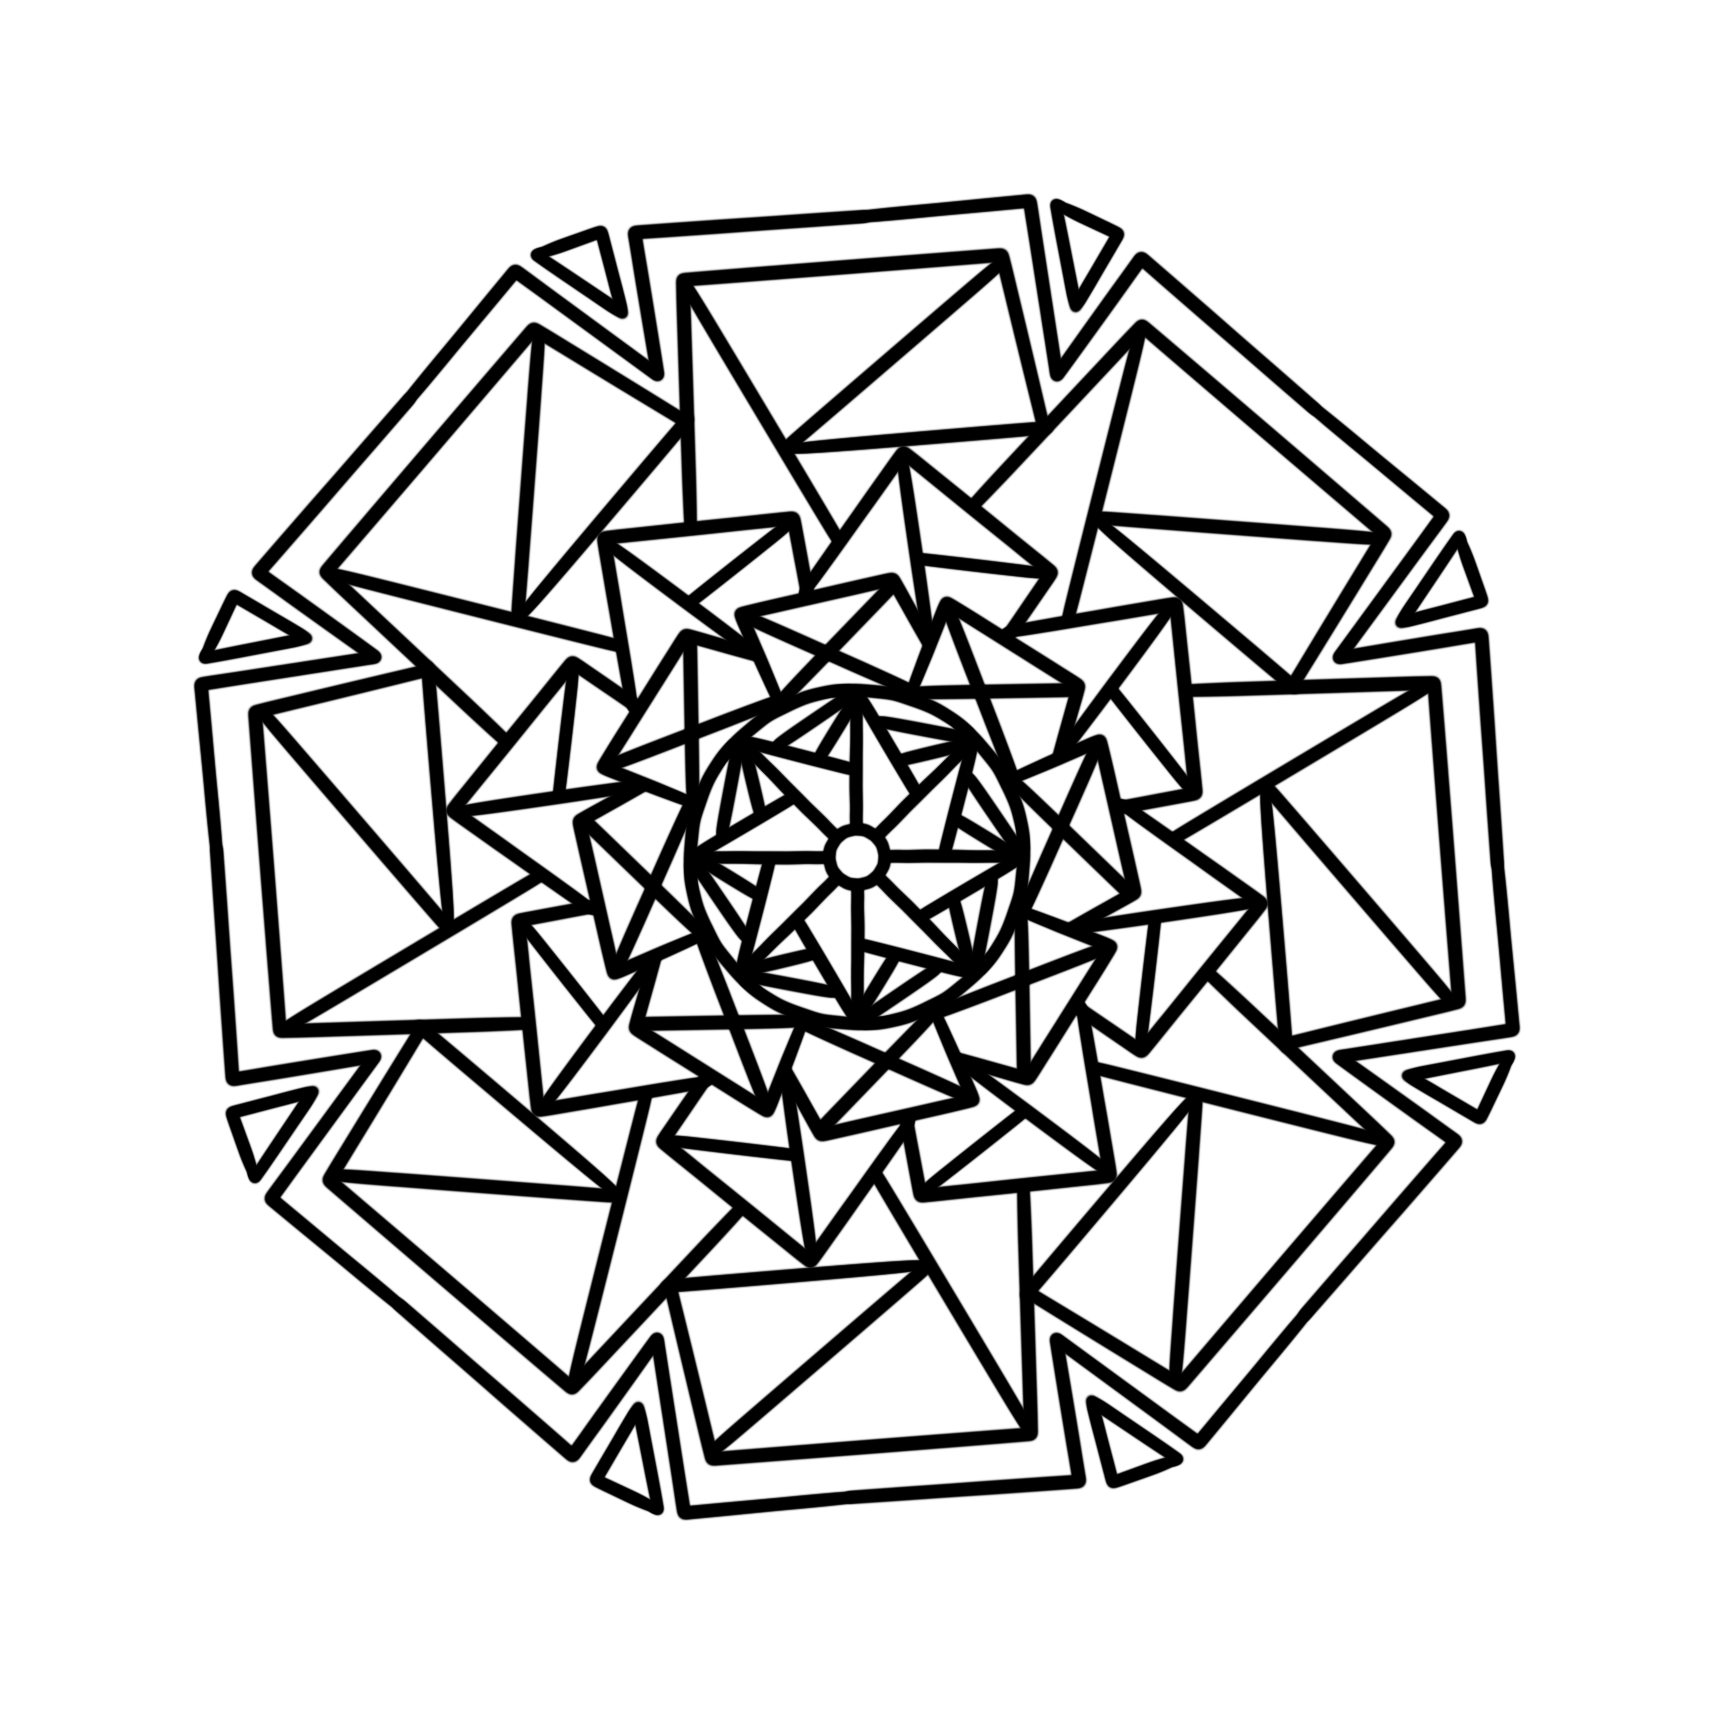 Radial symmetry coloring pages i made enjoy rprocreate